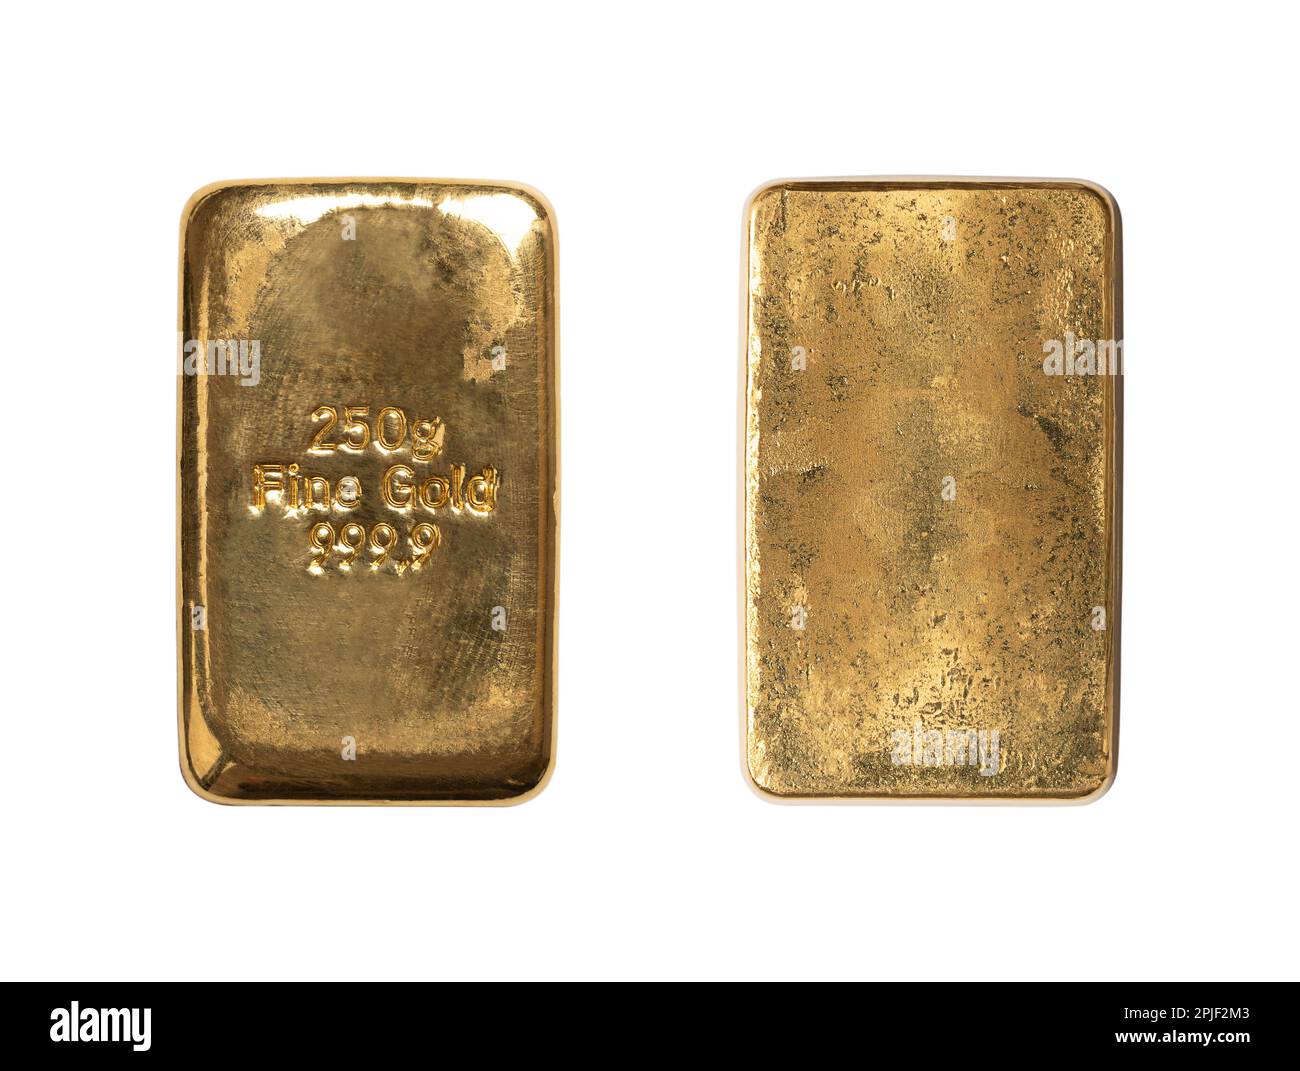 Gold bar, front and back side, isolated from above. Cast gold ingot, bullion of 250 gram, about 8 troy oz of pure metal. Real money, store of value. Stock Photo